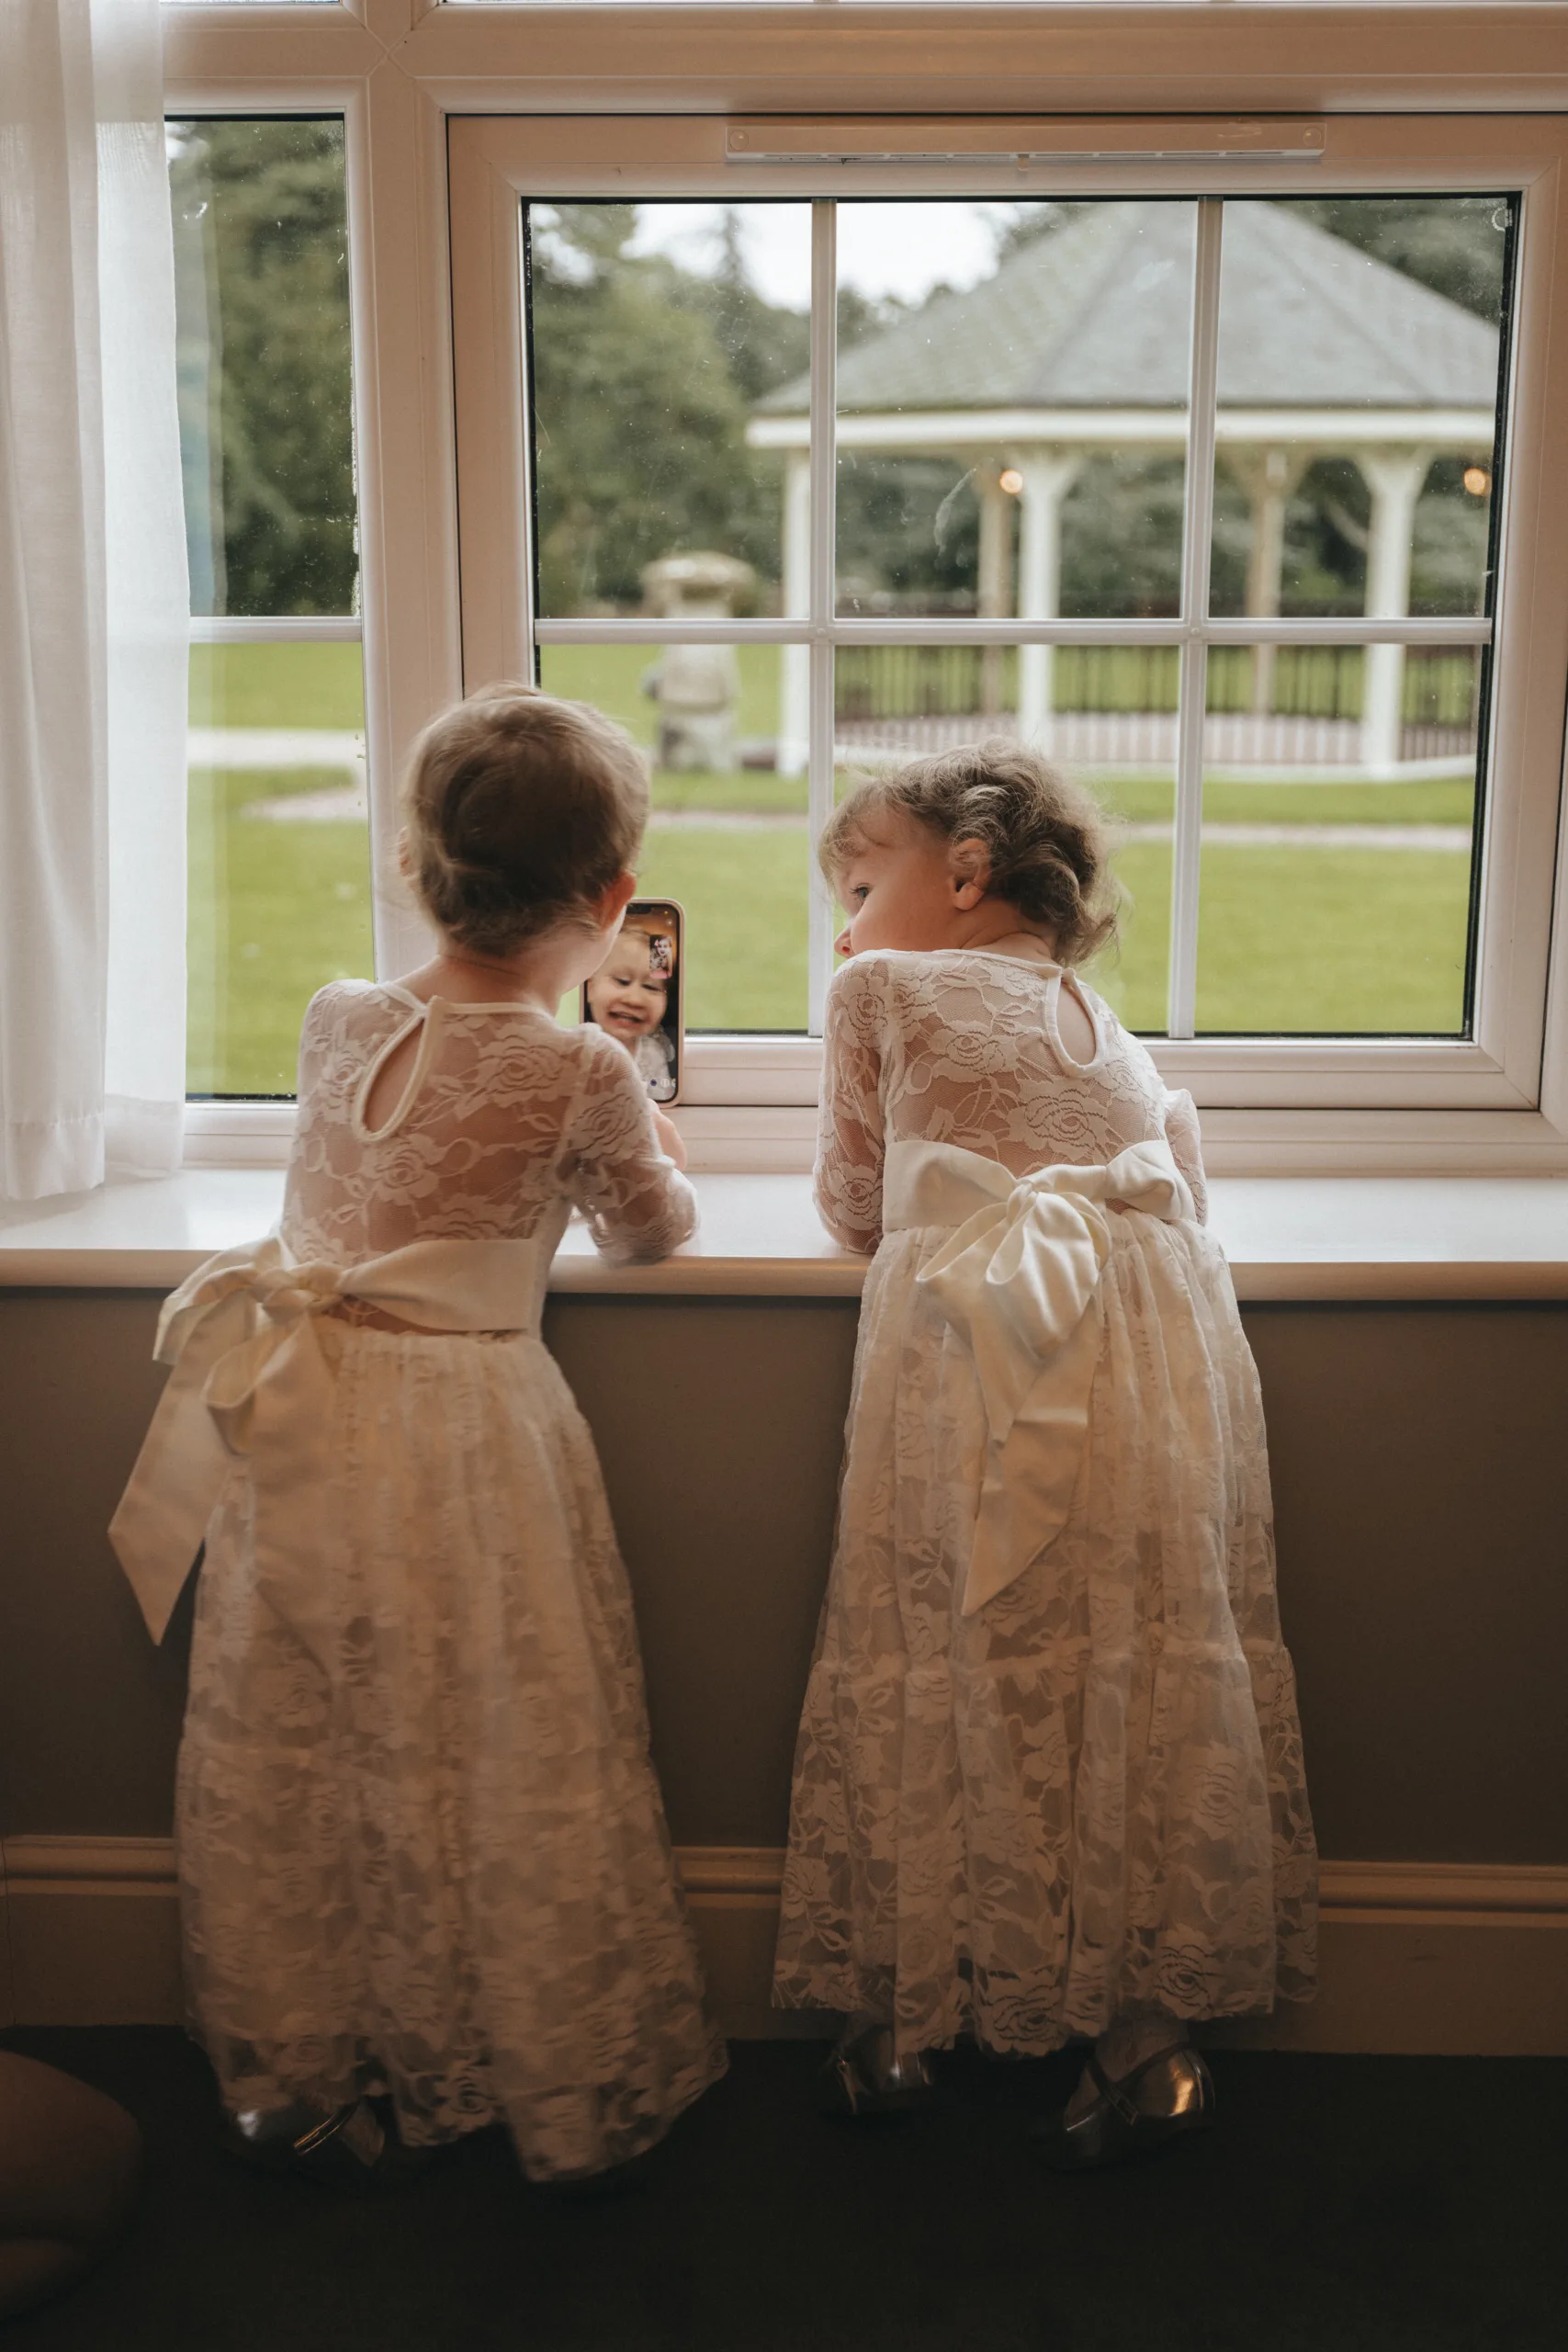 A photographer captures two little girls gazing out of a window in a beautiful moment.